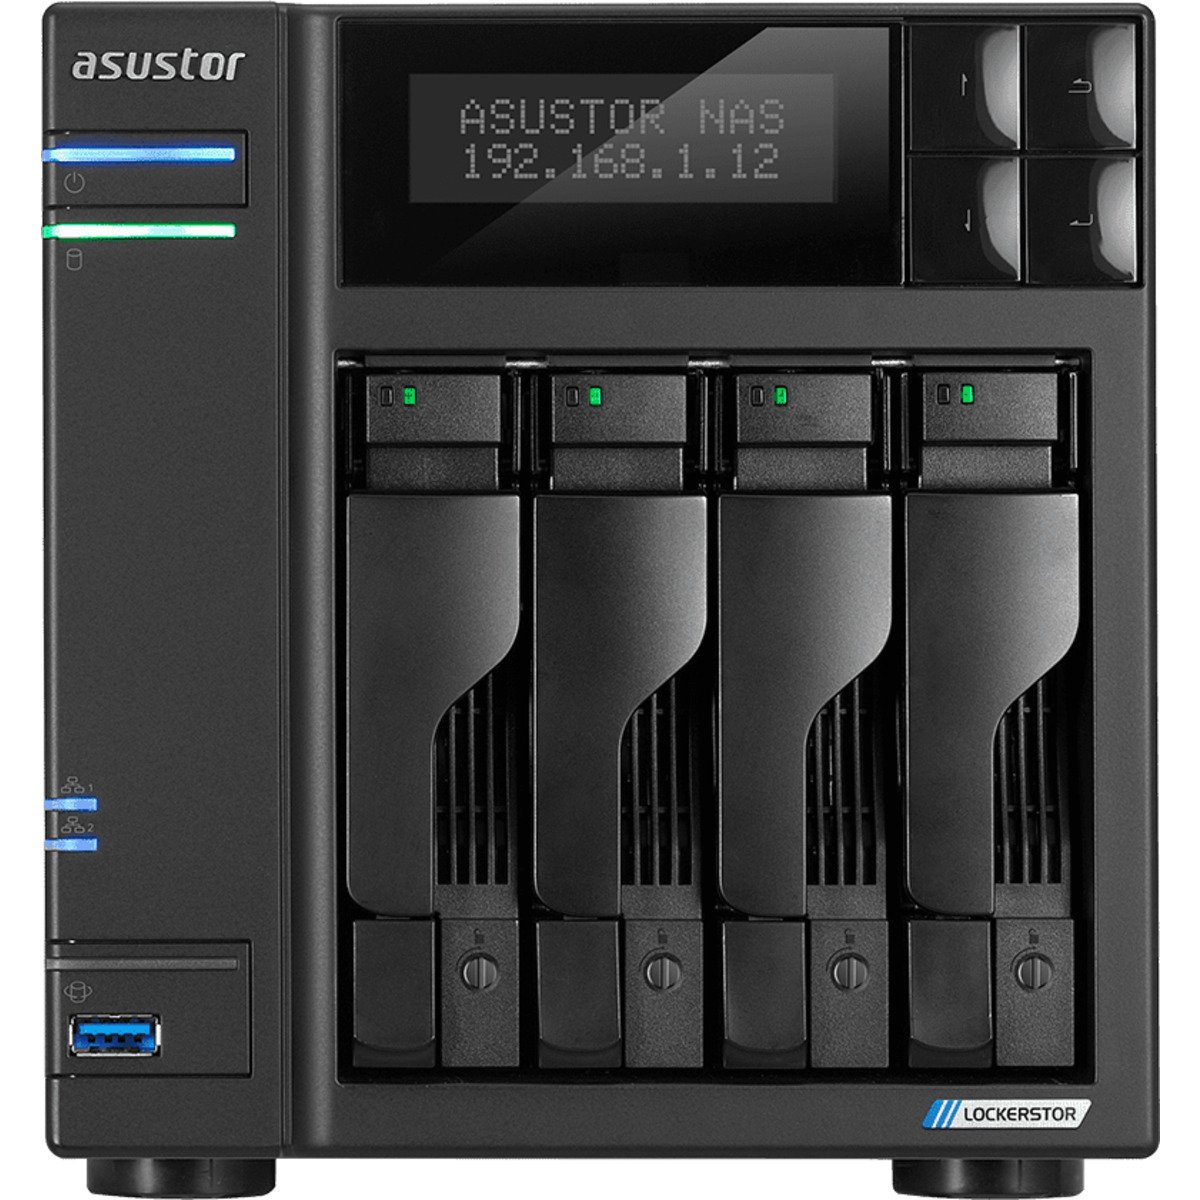 ASUSTOR AS6604T Lockerstor 4 48tb 4-Bay Desktop Multimedia / Power User / Business NAS - Network Attached Storage Device 4x12tb Western Digital Ultrastar DC HC520 HUH721212ALE600 3.5 7200rpm SATA 6Gb/s HDD ENTERPRISE Class Drives Installed - Burn-In Tested - FREE RAM UPGRADE AS6604T Lockerstor 4